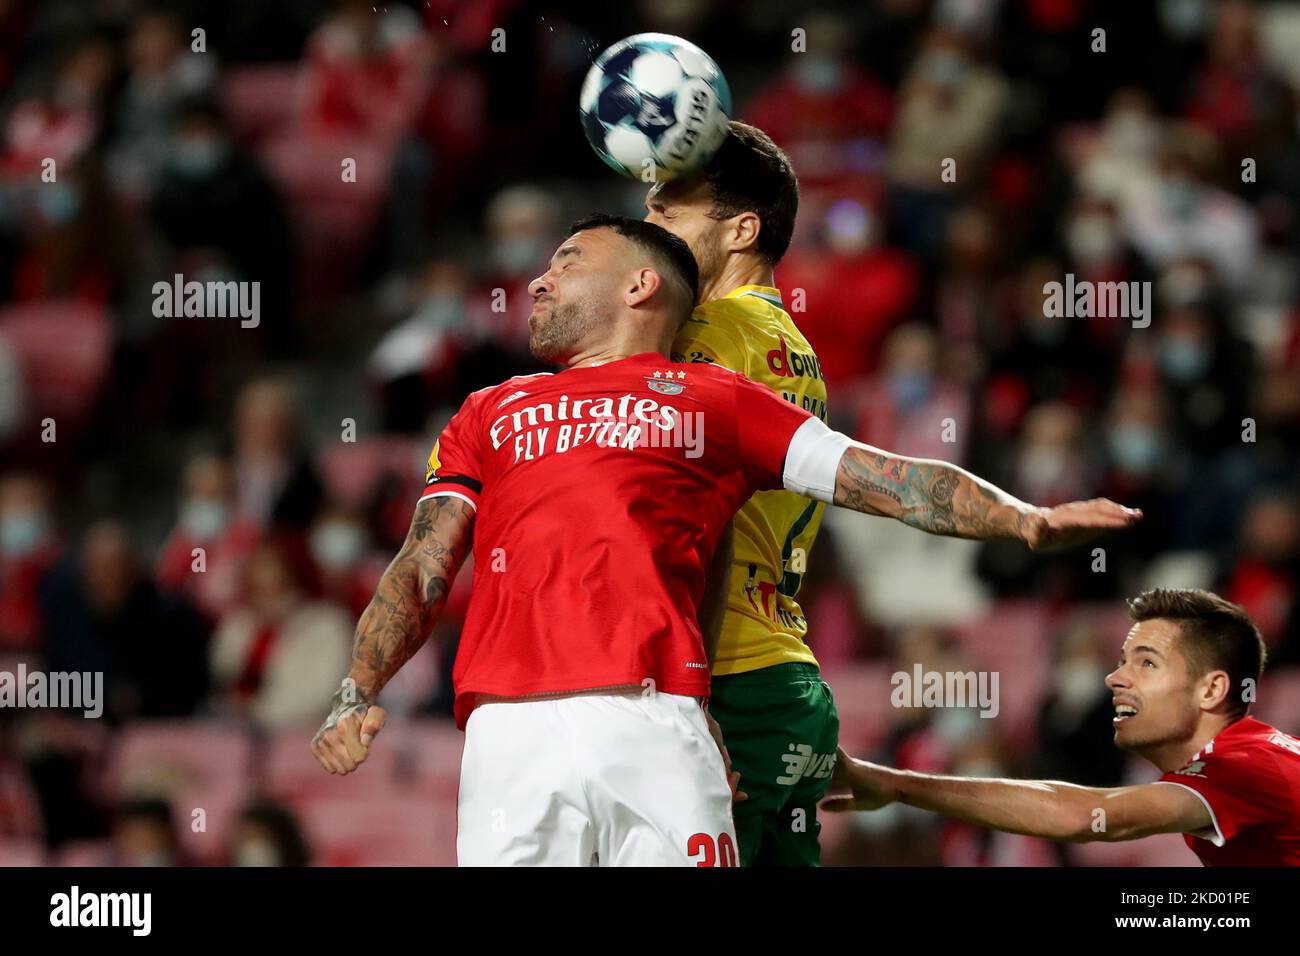 Otamendi of SL Benfica(L) vies with Marco Baixinho of FC Pacos Ferreira during the Portuguese League football match between SL Benfica and FC Pacos Ferreira at the Luz stadium in Lisbon, Portugal on January 9, 2022. (Photo by Pedro FiÃºza/NurPhoto) Stock Photo